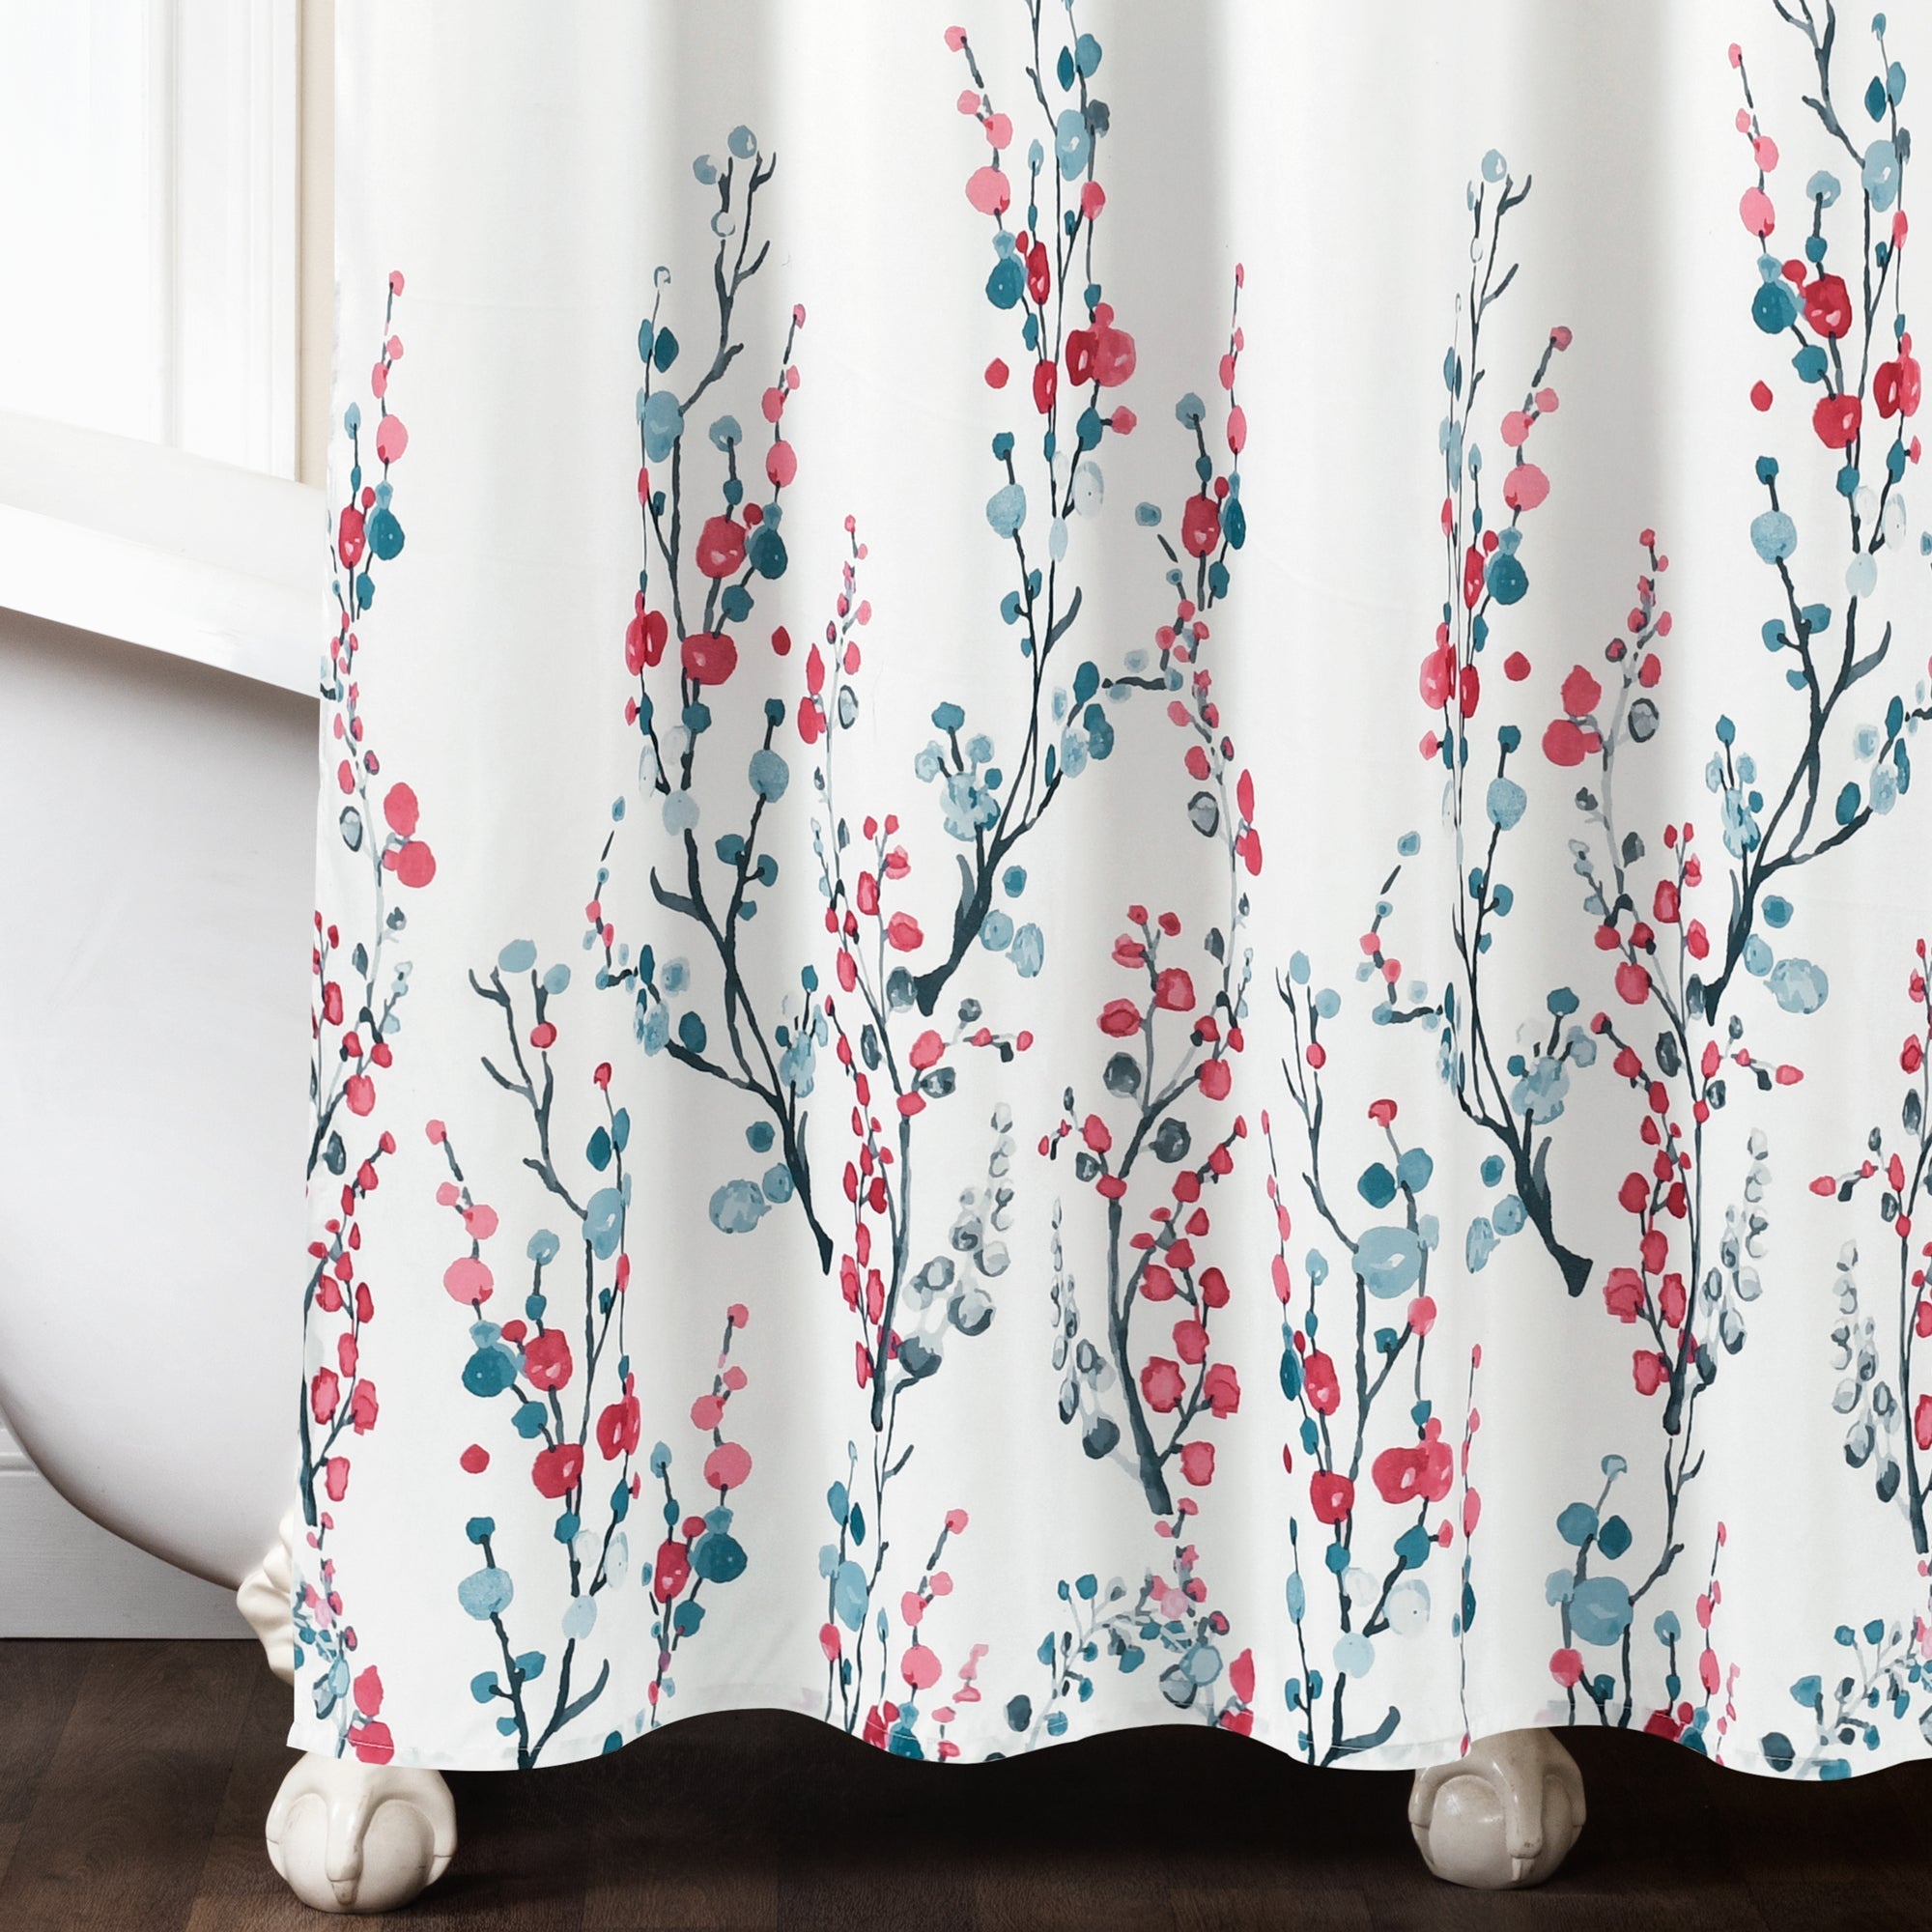 Mirabelle Watercolor Floral Shower Curtain